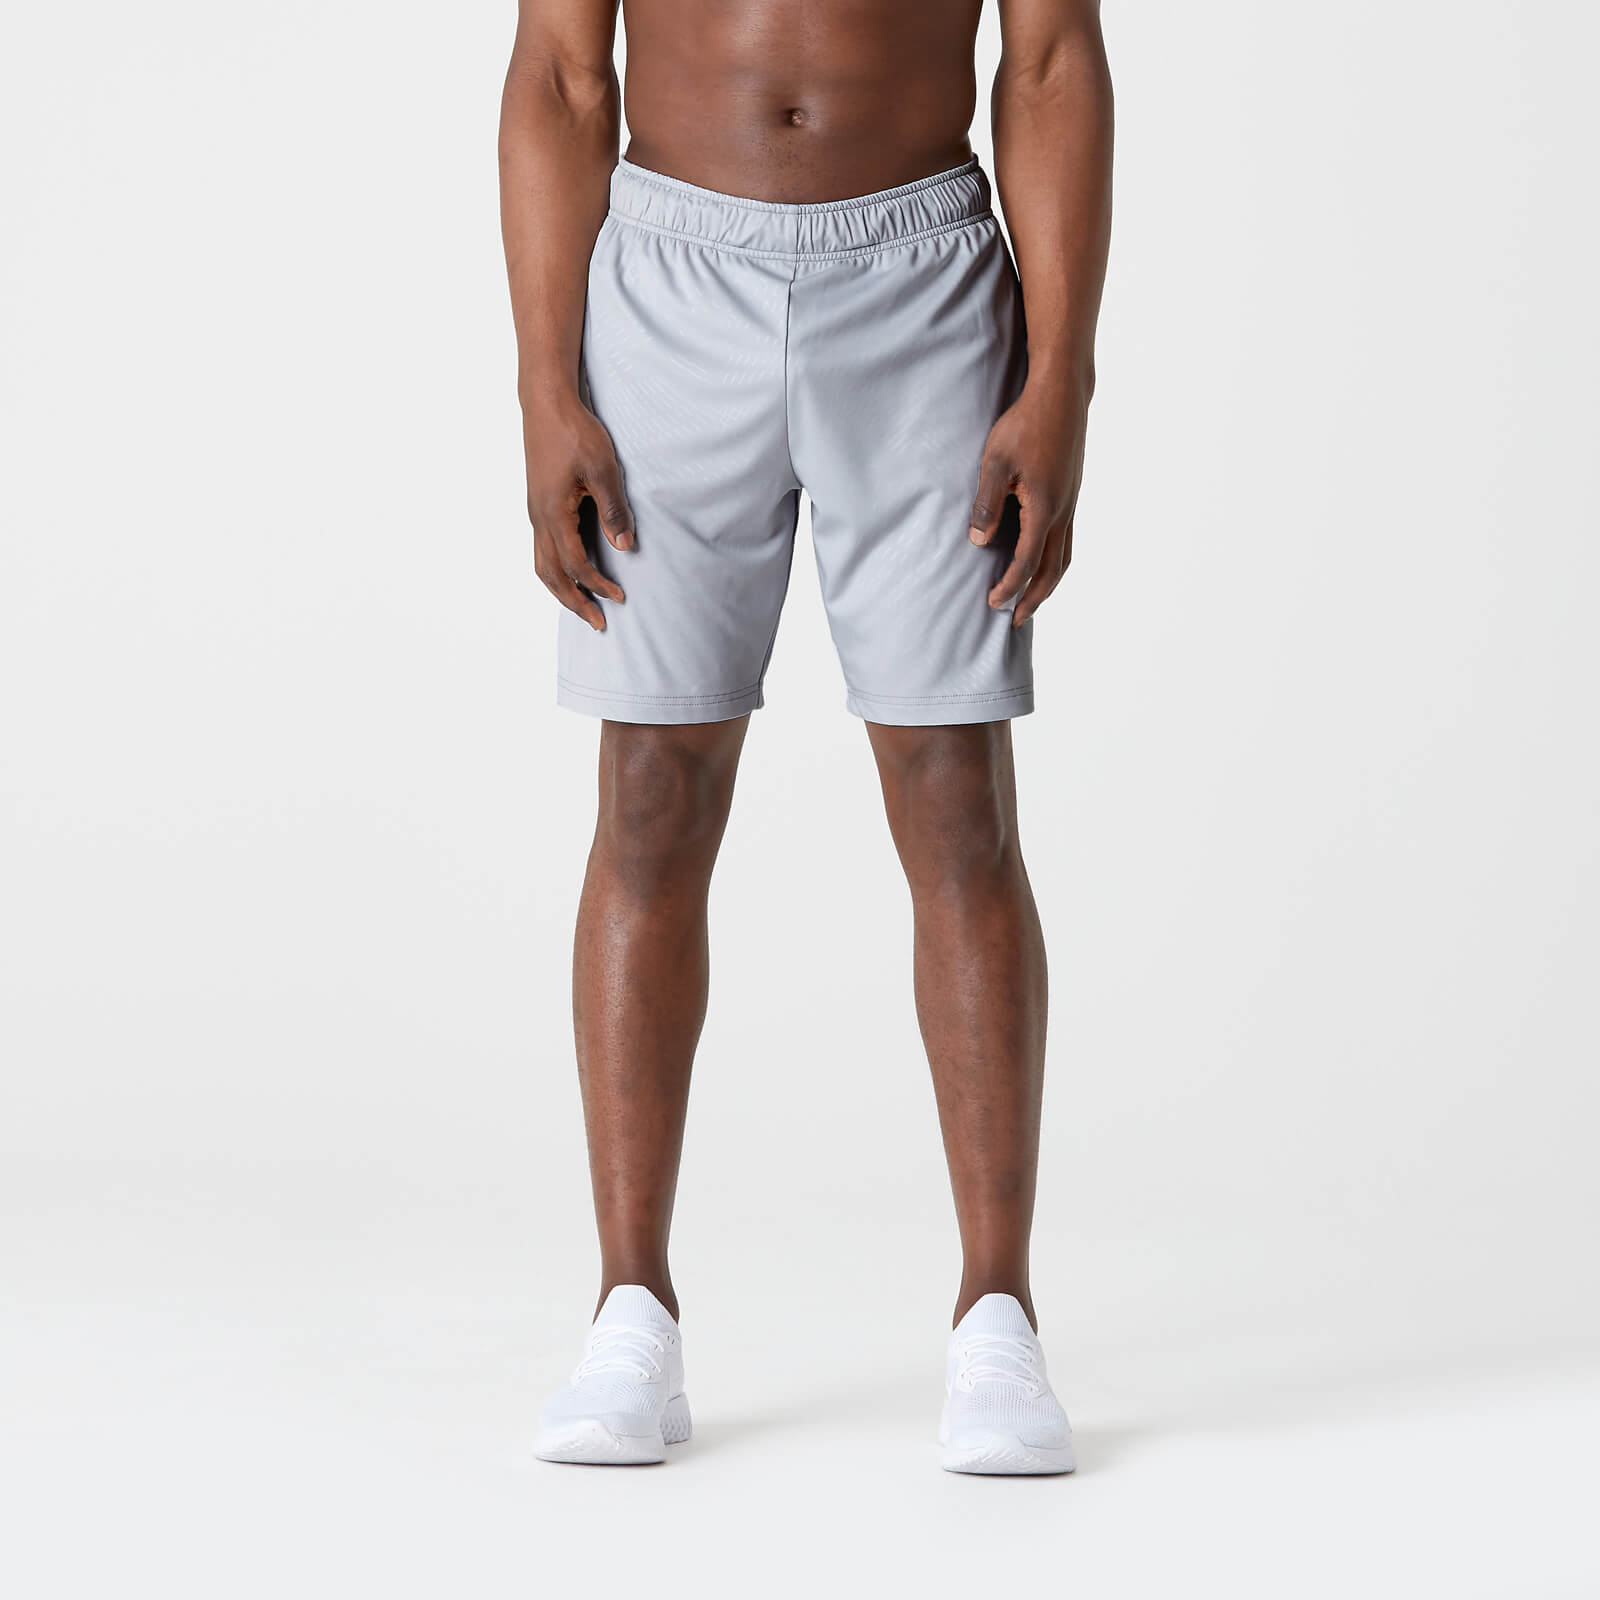 Myprotein Dry-Tech Infinity Shorts - Silver - S